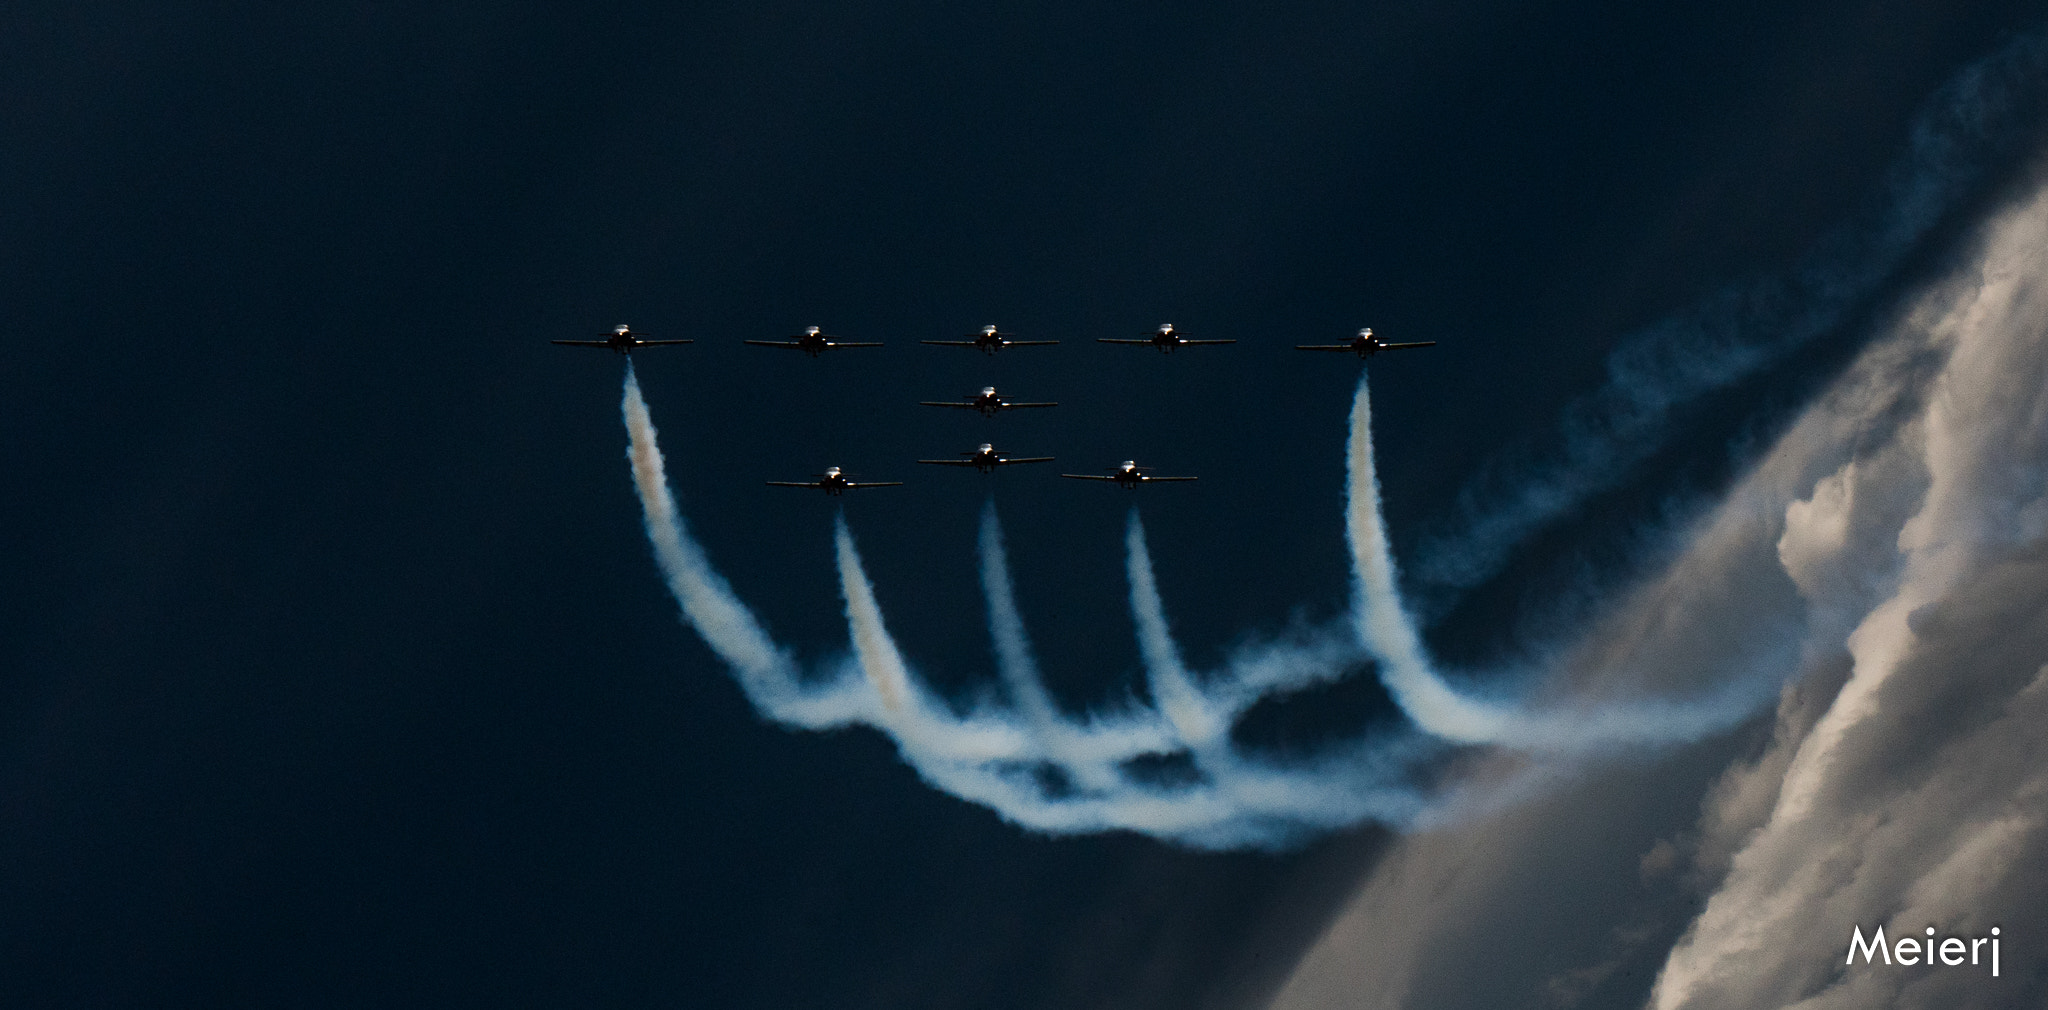 Sony a6300 sample photo. Banking in formation photography